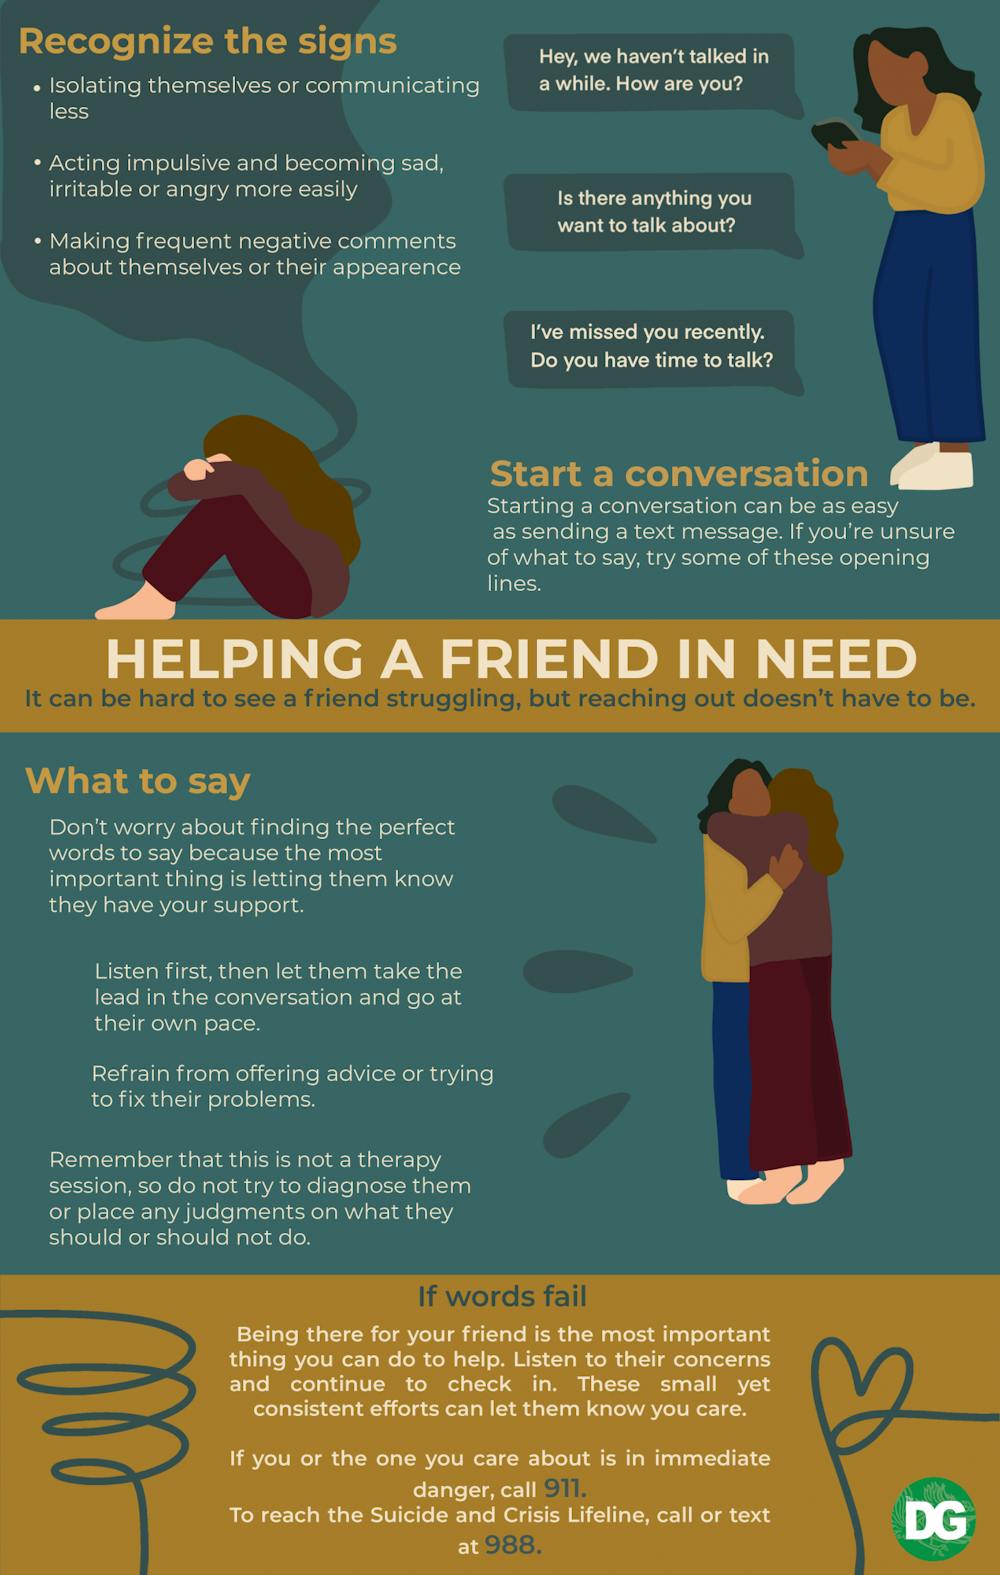 <p>It can be difficult to see a friend struggling with mental health, but by initiating a conversation and being a good listener, anyone can help a friend in need.&nbsp;</p>